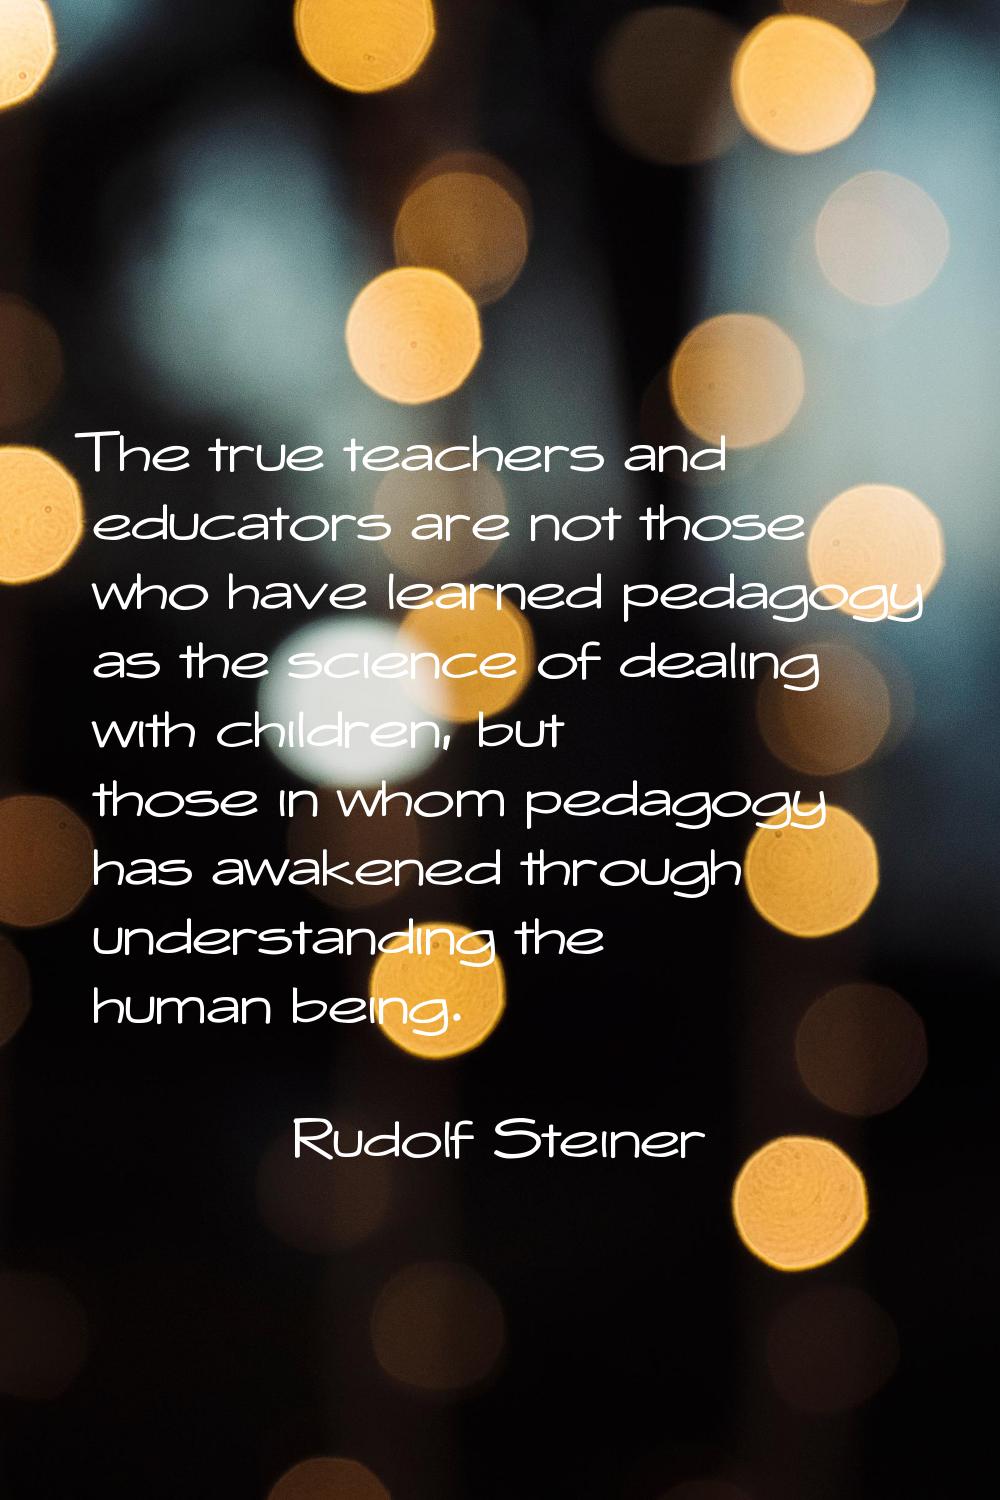 The true teachers and educators are not those who have learned pedagogy as the science of dealing w